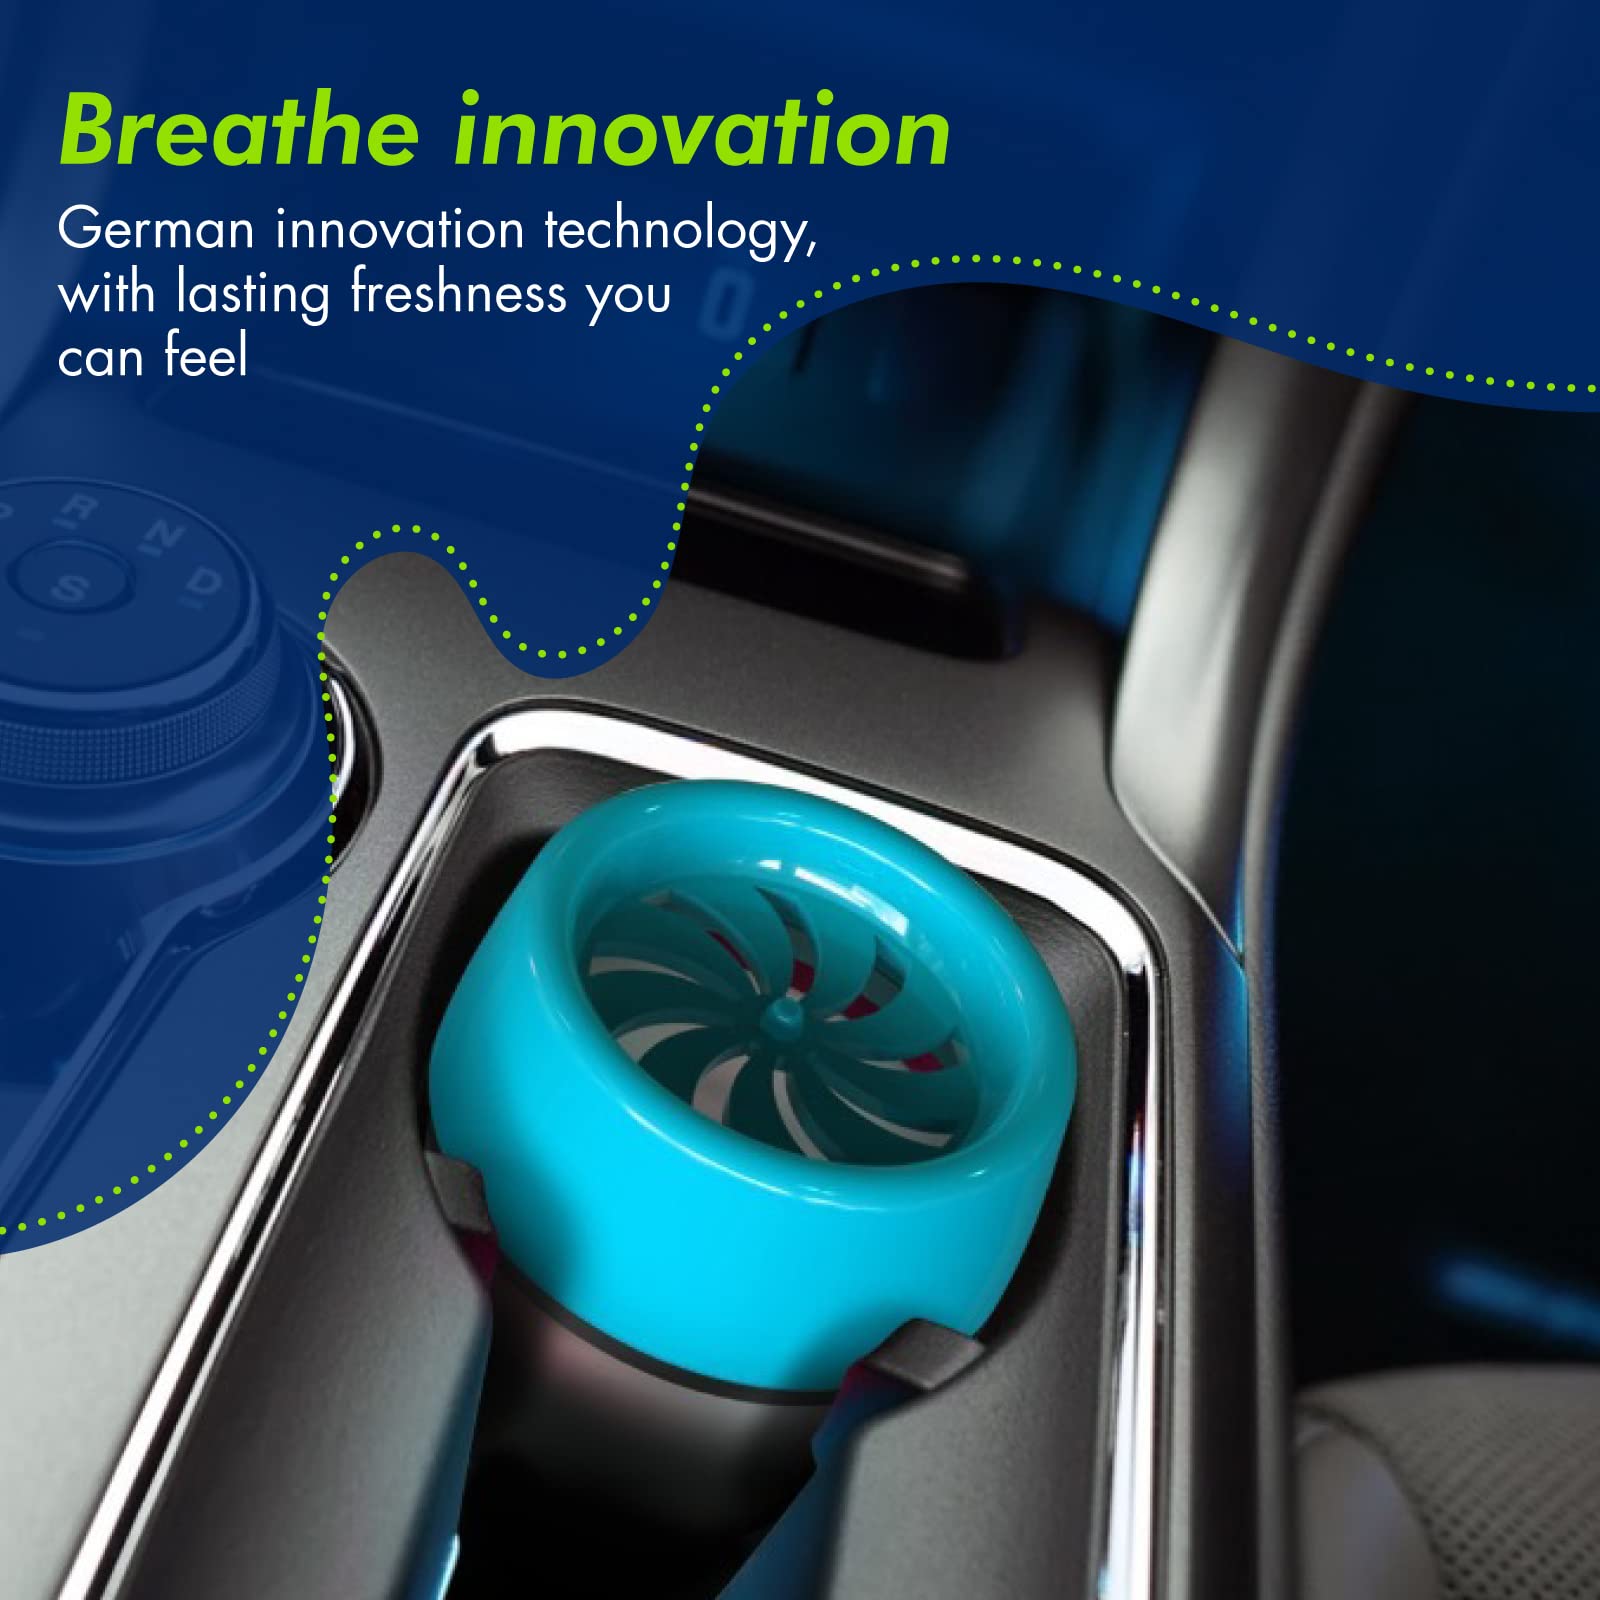 Absorbia Aviator Car Gel Air Freshener - Pack of 2 (125g X 2) with fragrance of Blue Wave & Tropical Joy | with intensity regulator for stronger or lighter fragrance | Water based, low VOC and pDCB free | No nasty chemicals